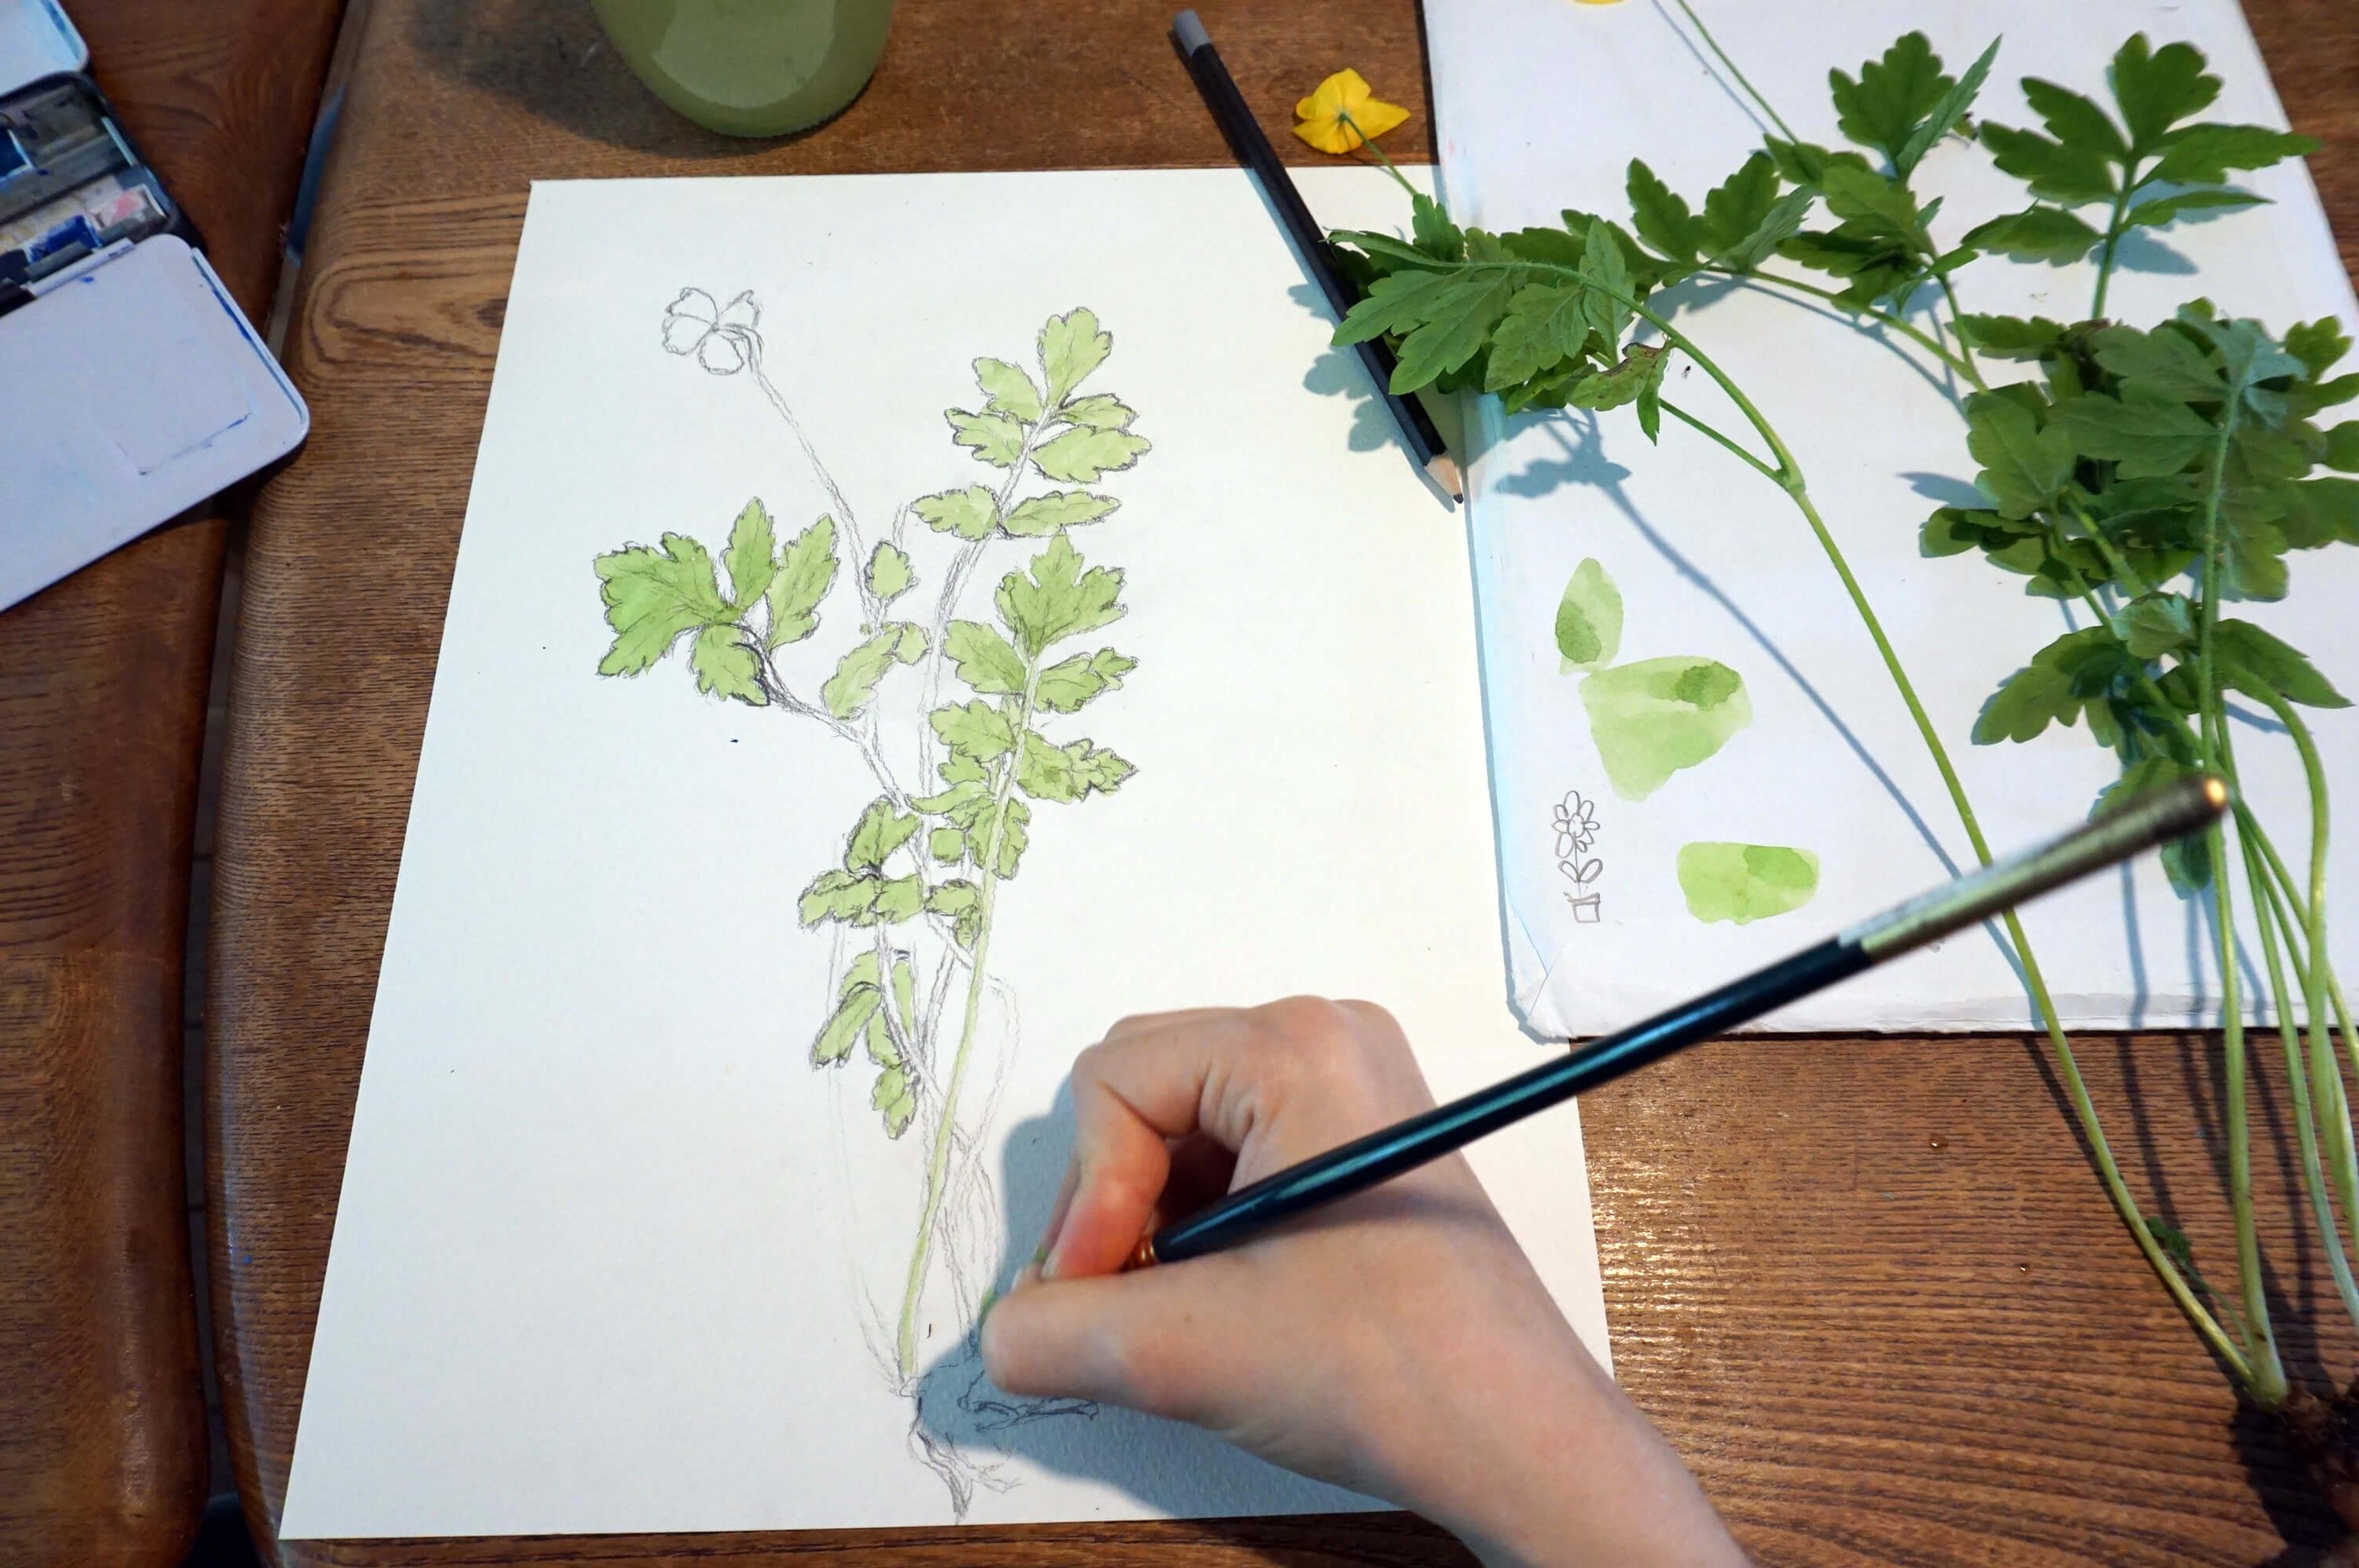 A photograph of a child's hand drawing a plant. The plant being illustrated is placed next to the drawing.